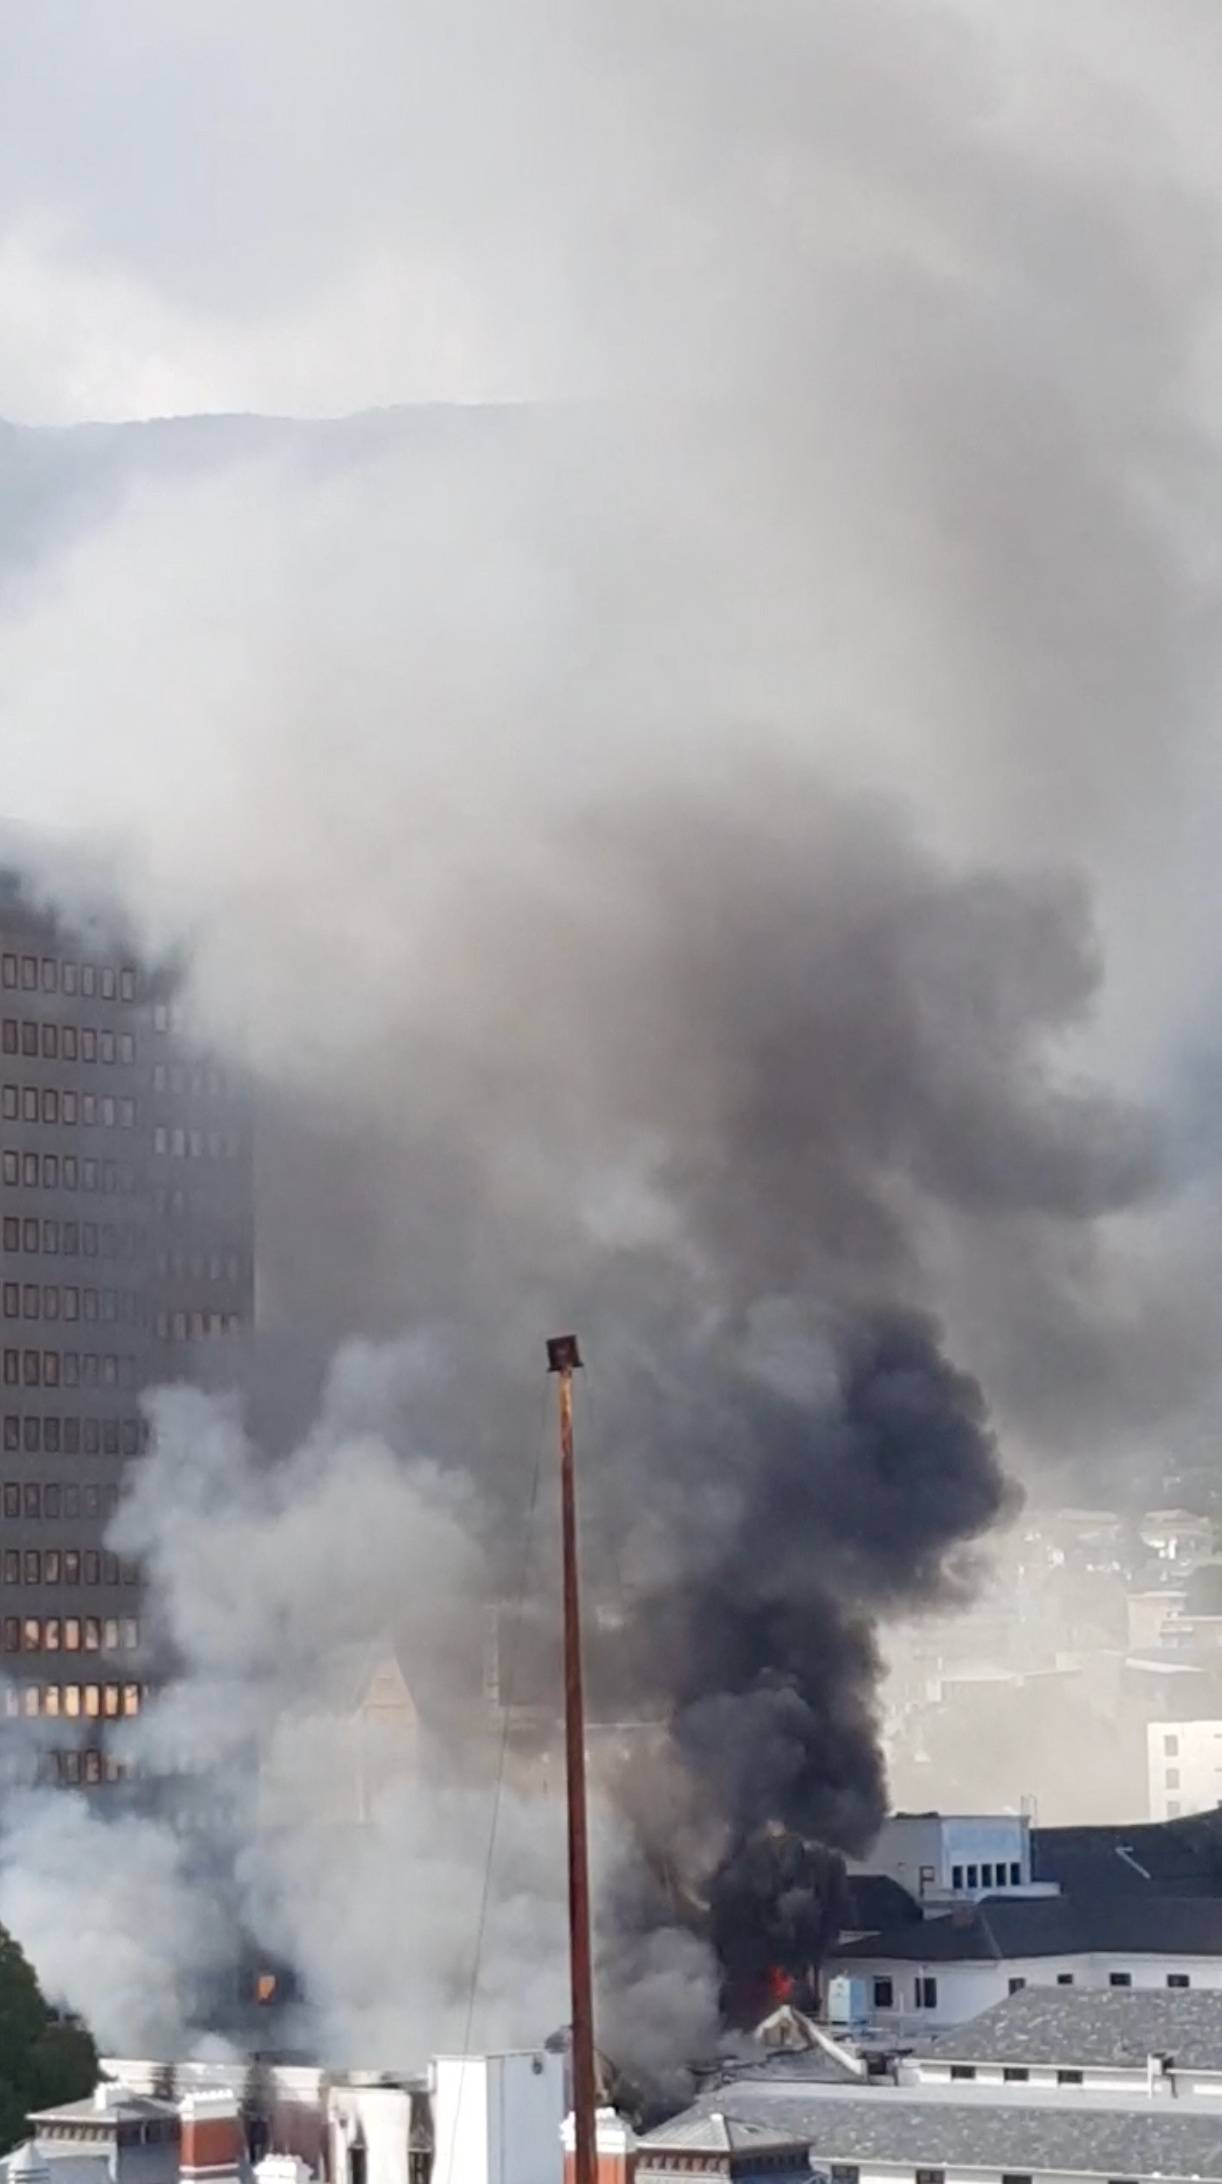 Smoke rises from a burning building in Cape Town